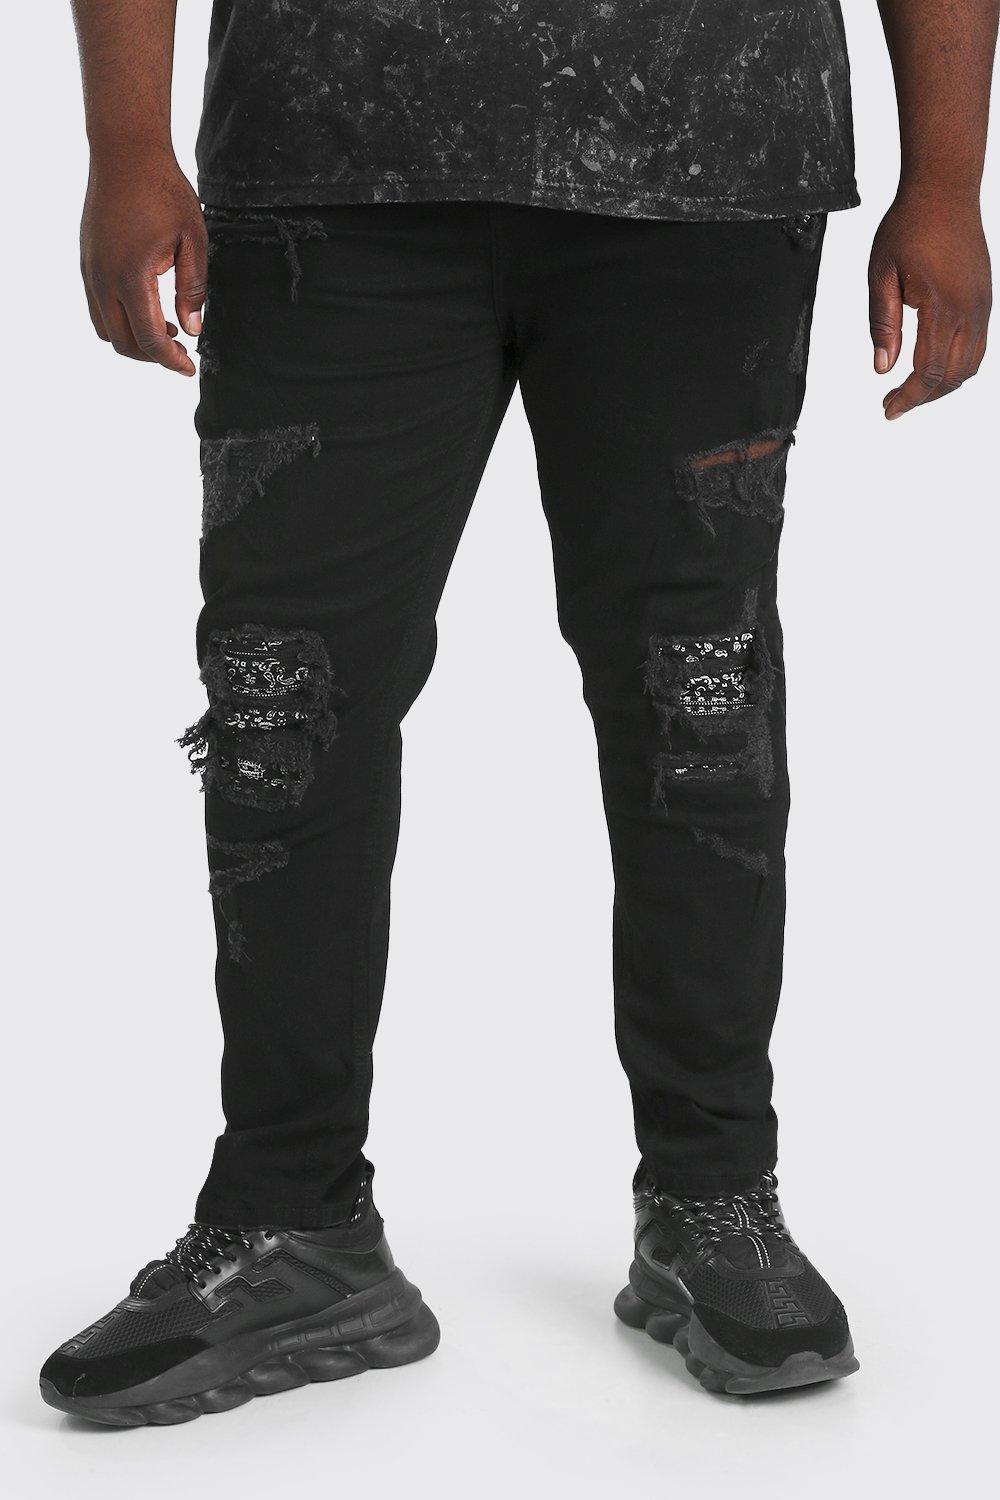 moto jeans mens big and tall